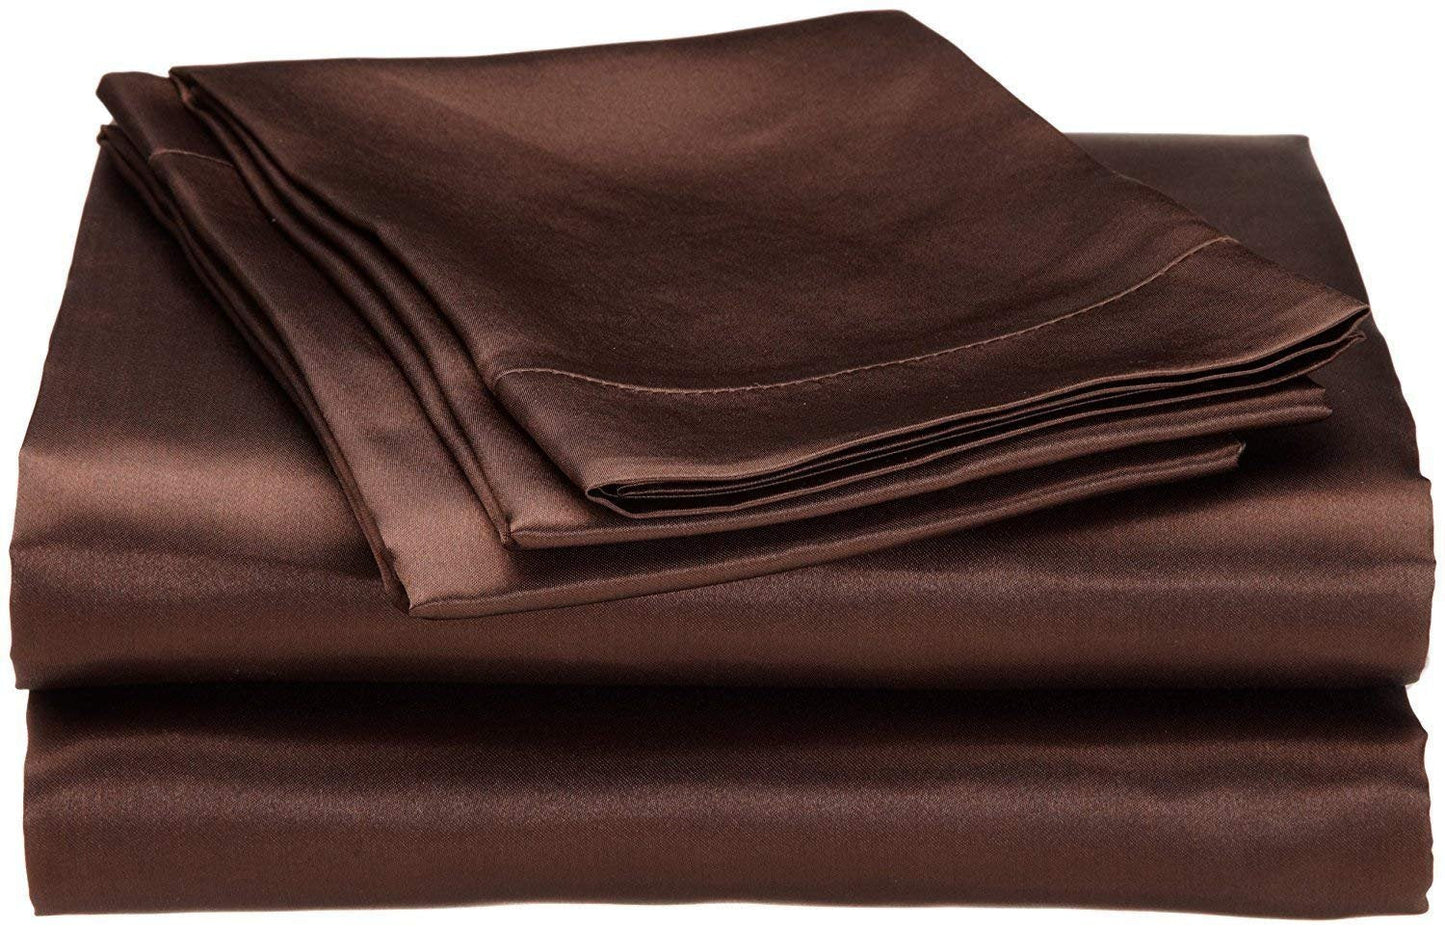 10 Inch Pocket Sheet Set Mulberry Sateen Silk Chocolate at-www.egyptianhomelinens.com